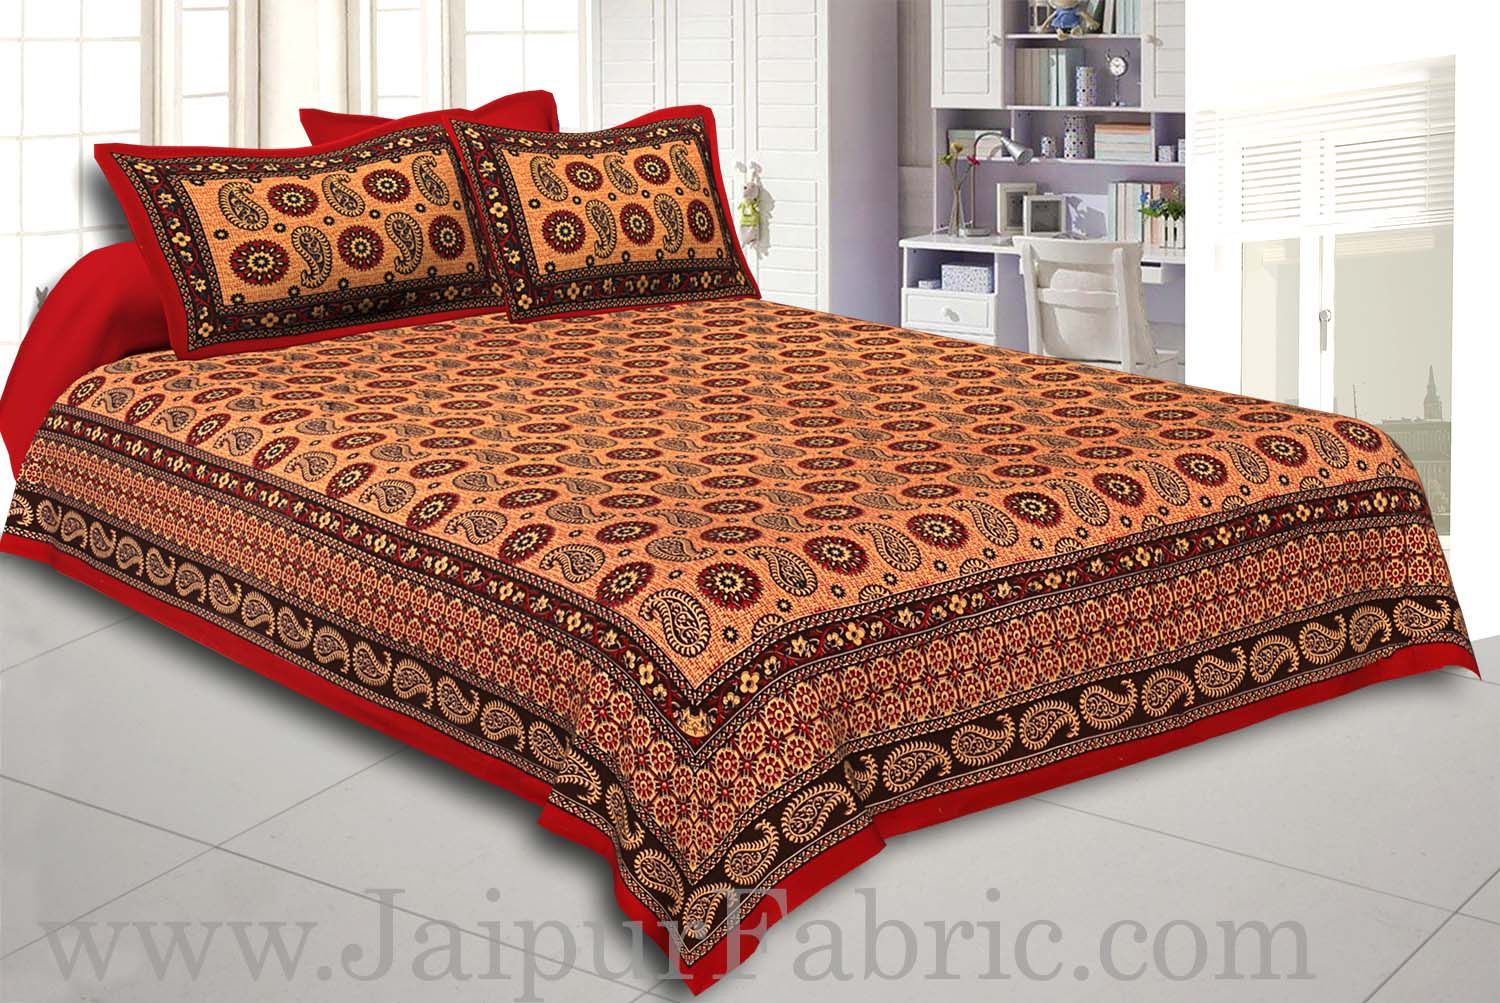 Red Border Peach Base Flower and Paisley Pattern Coton Double Bedsheet